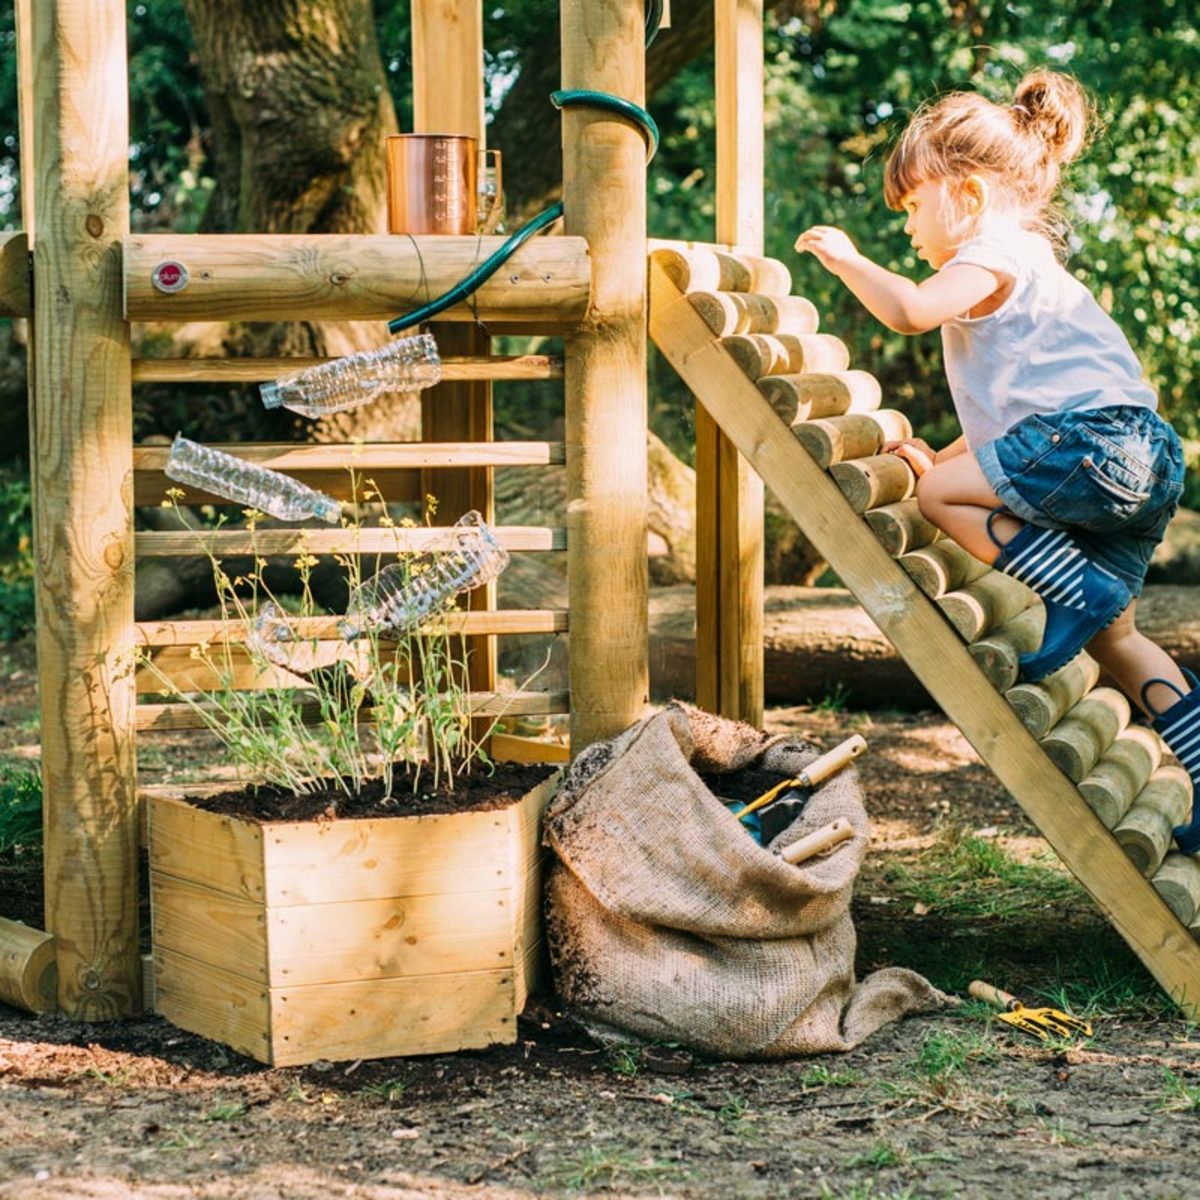 Plum Discovery Woodland Treehouse (3+ Years)